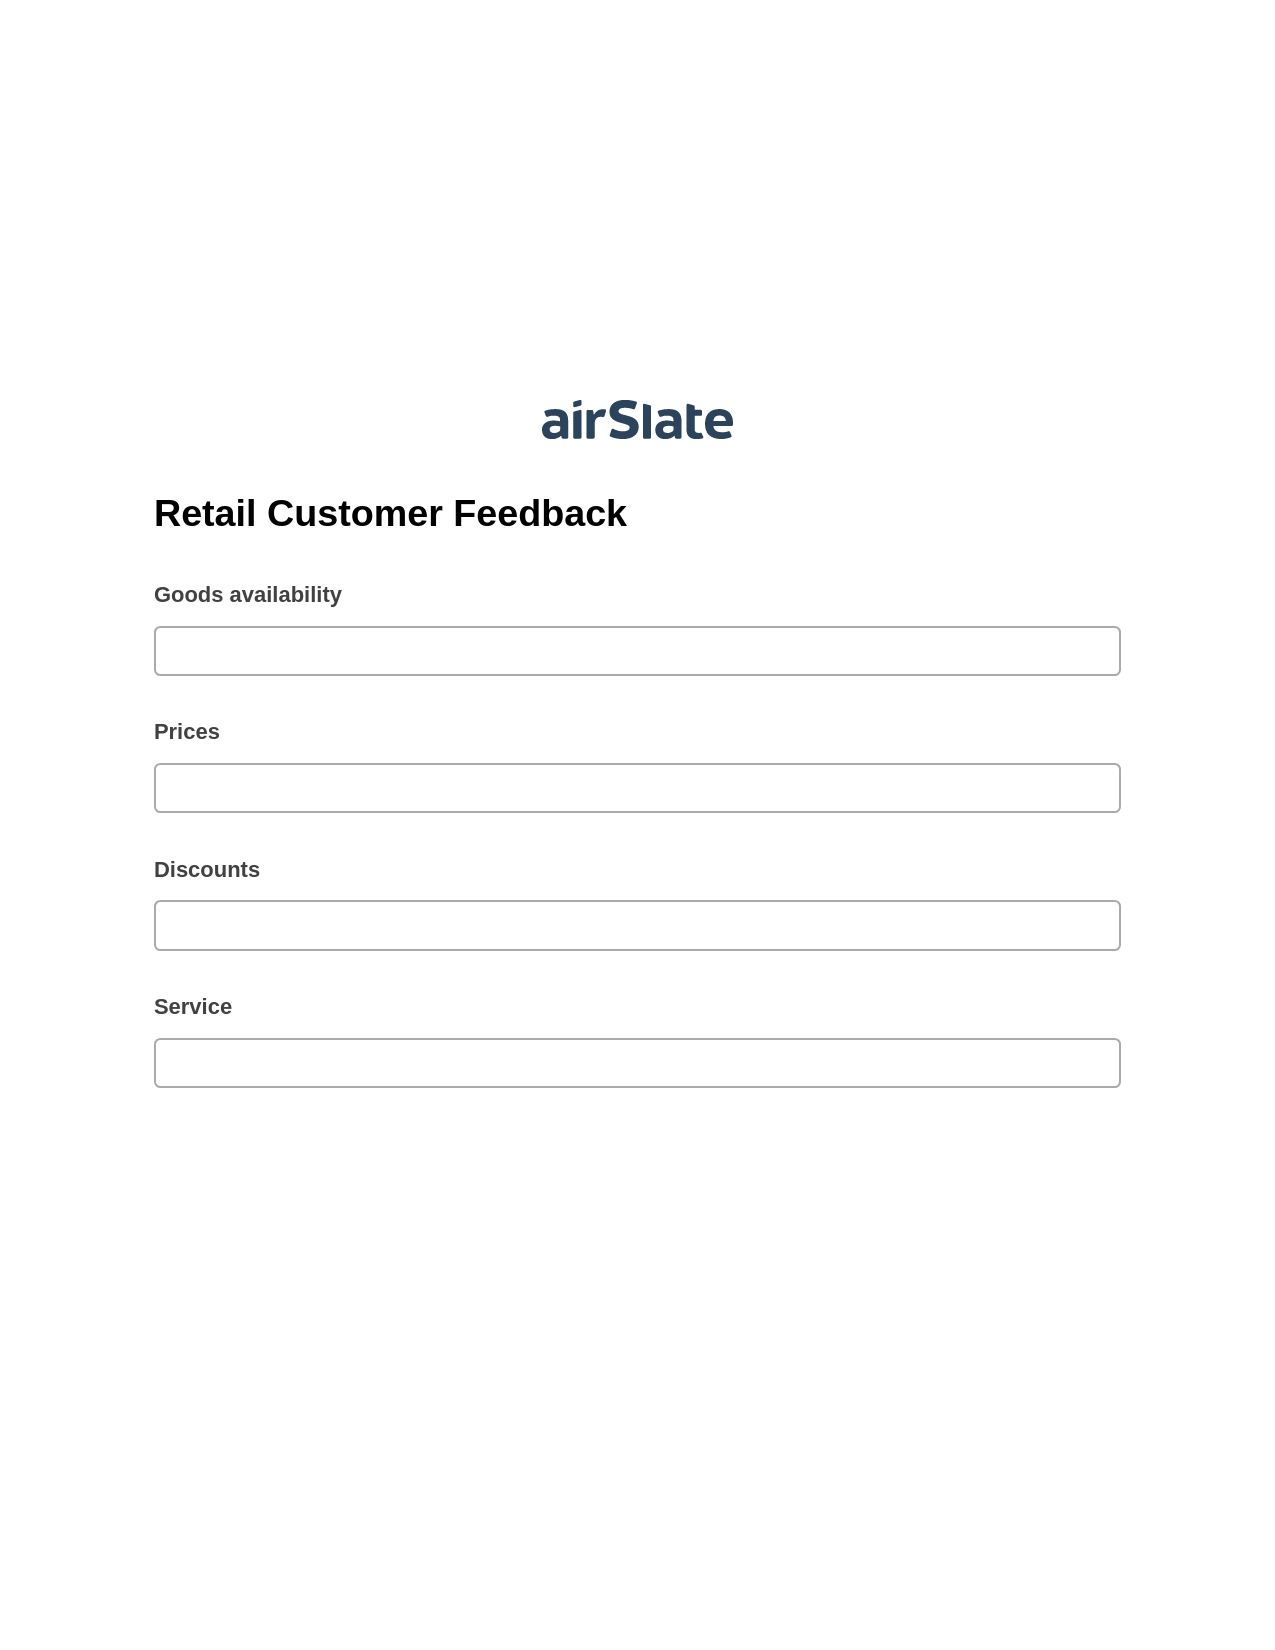 Retail Customer Feedback Pre-fill from MySQL Bot, Document Hide Bot, Export to Excel 365 Bot